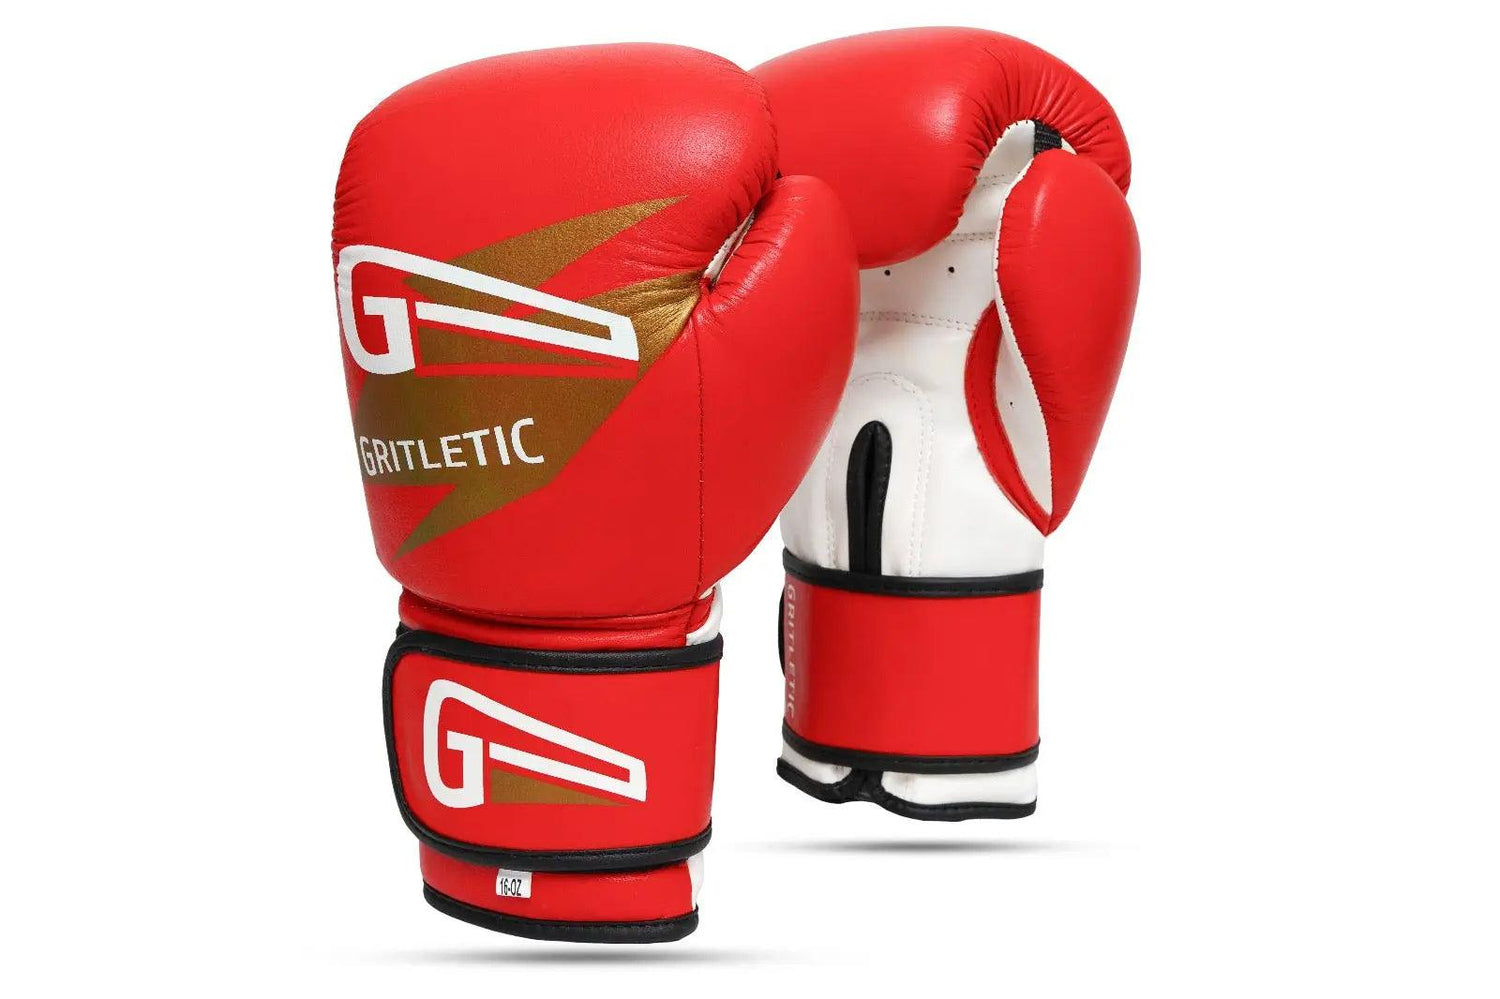 Gritletic Pro Premium Red and White Leather Boxing & MMA Punching Bag Gloves